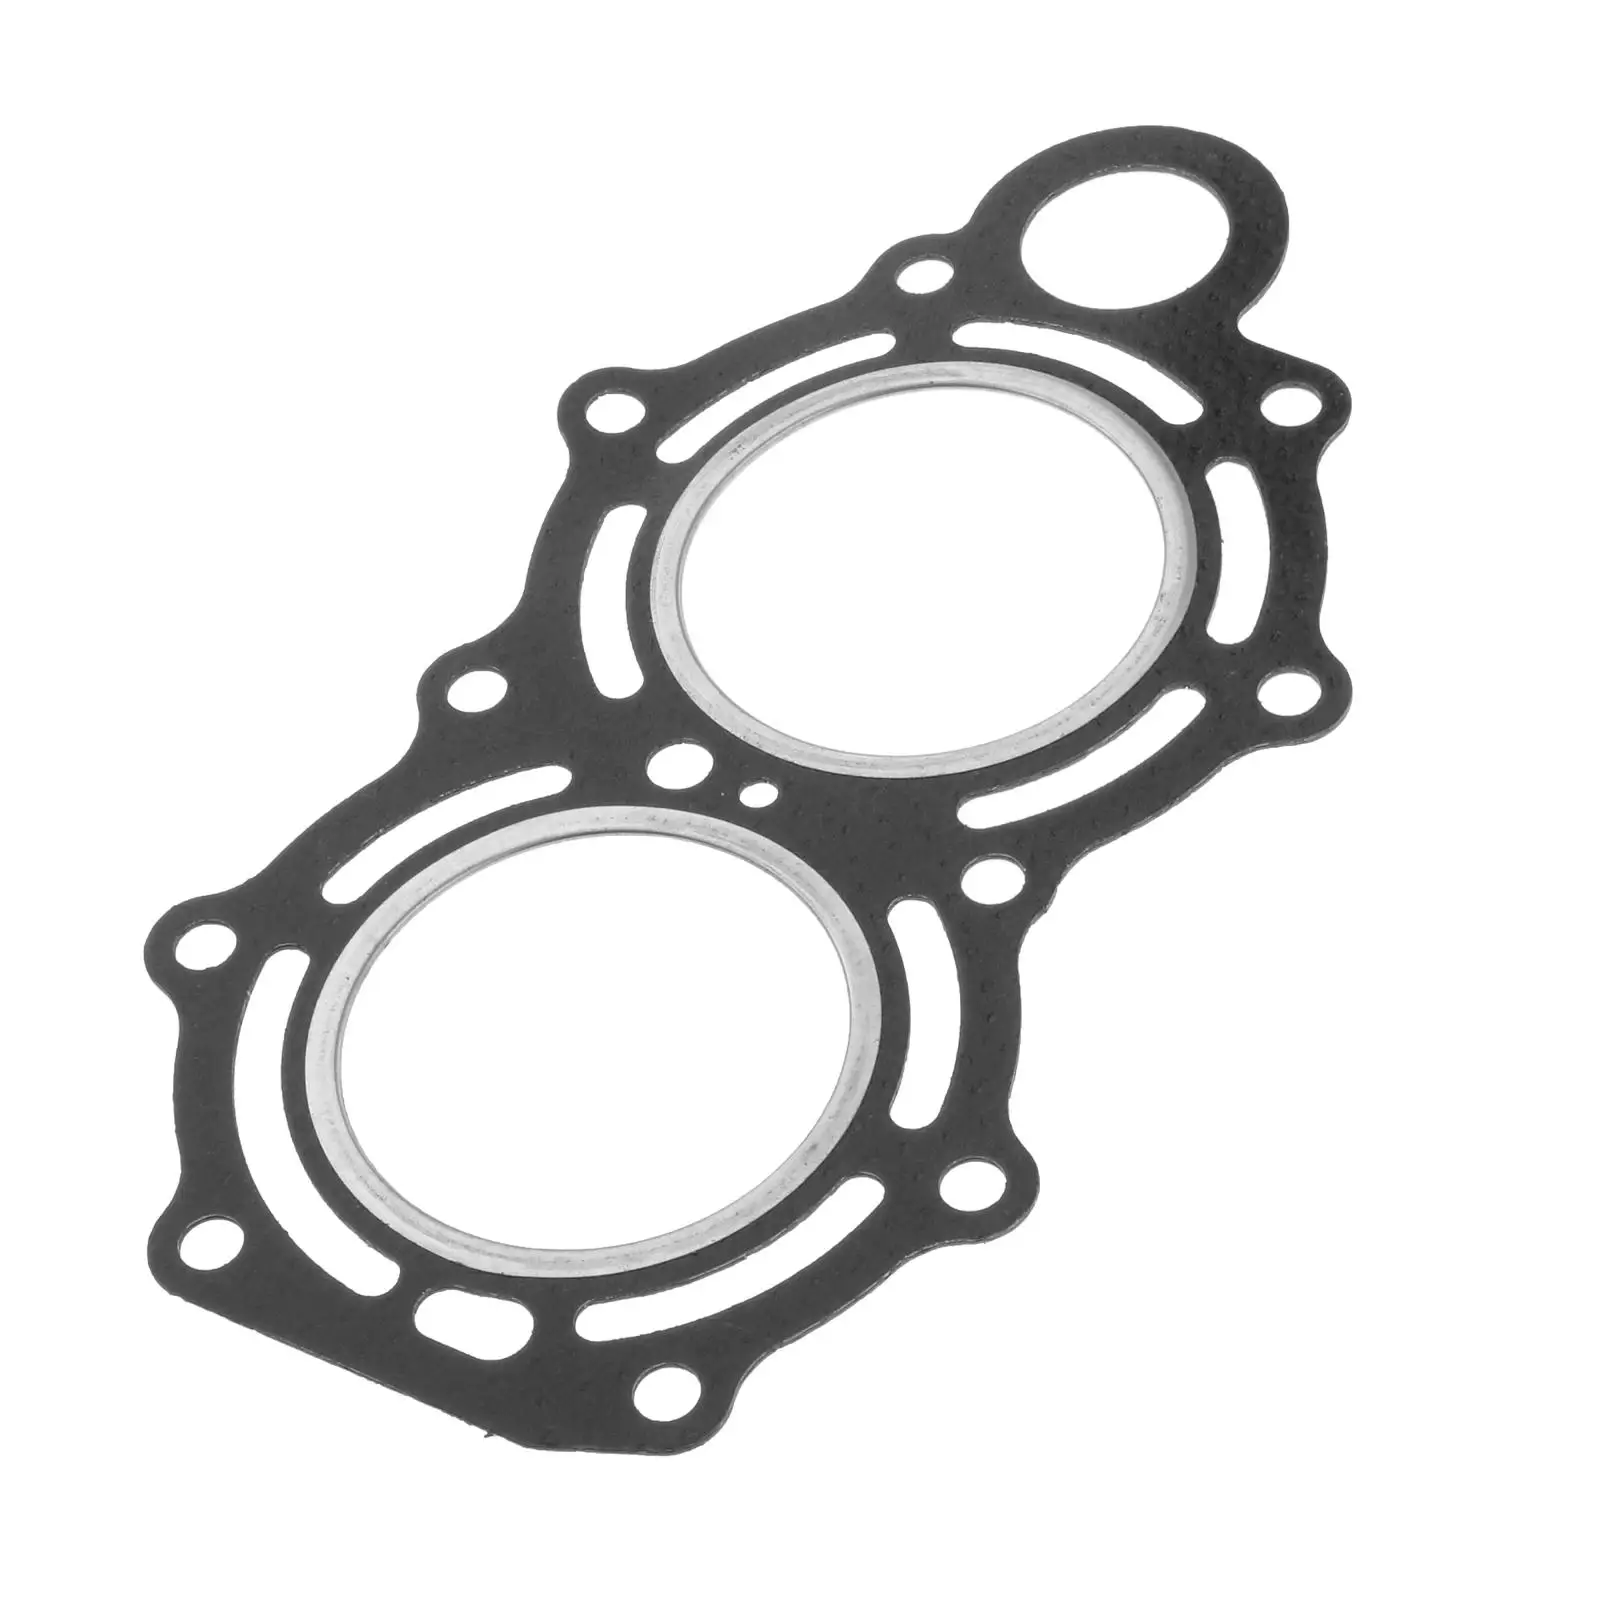 Cylinder Head Gasket 3B2-01005 for Tohatsu 2 Stroke 6HP 8HP 9.8HP Outboards